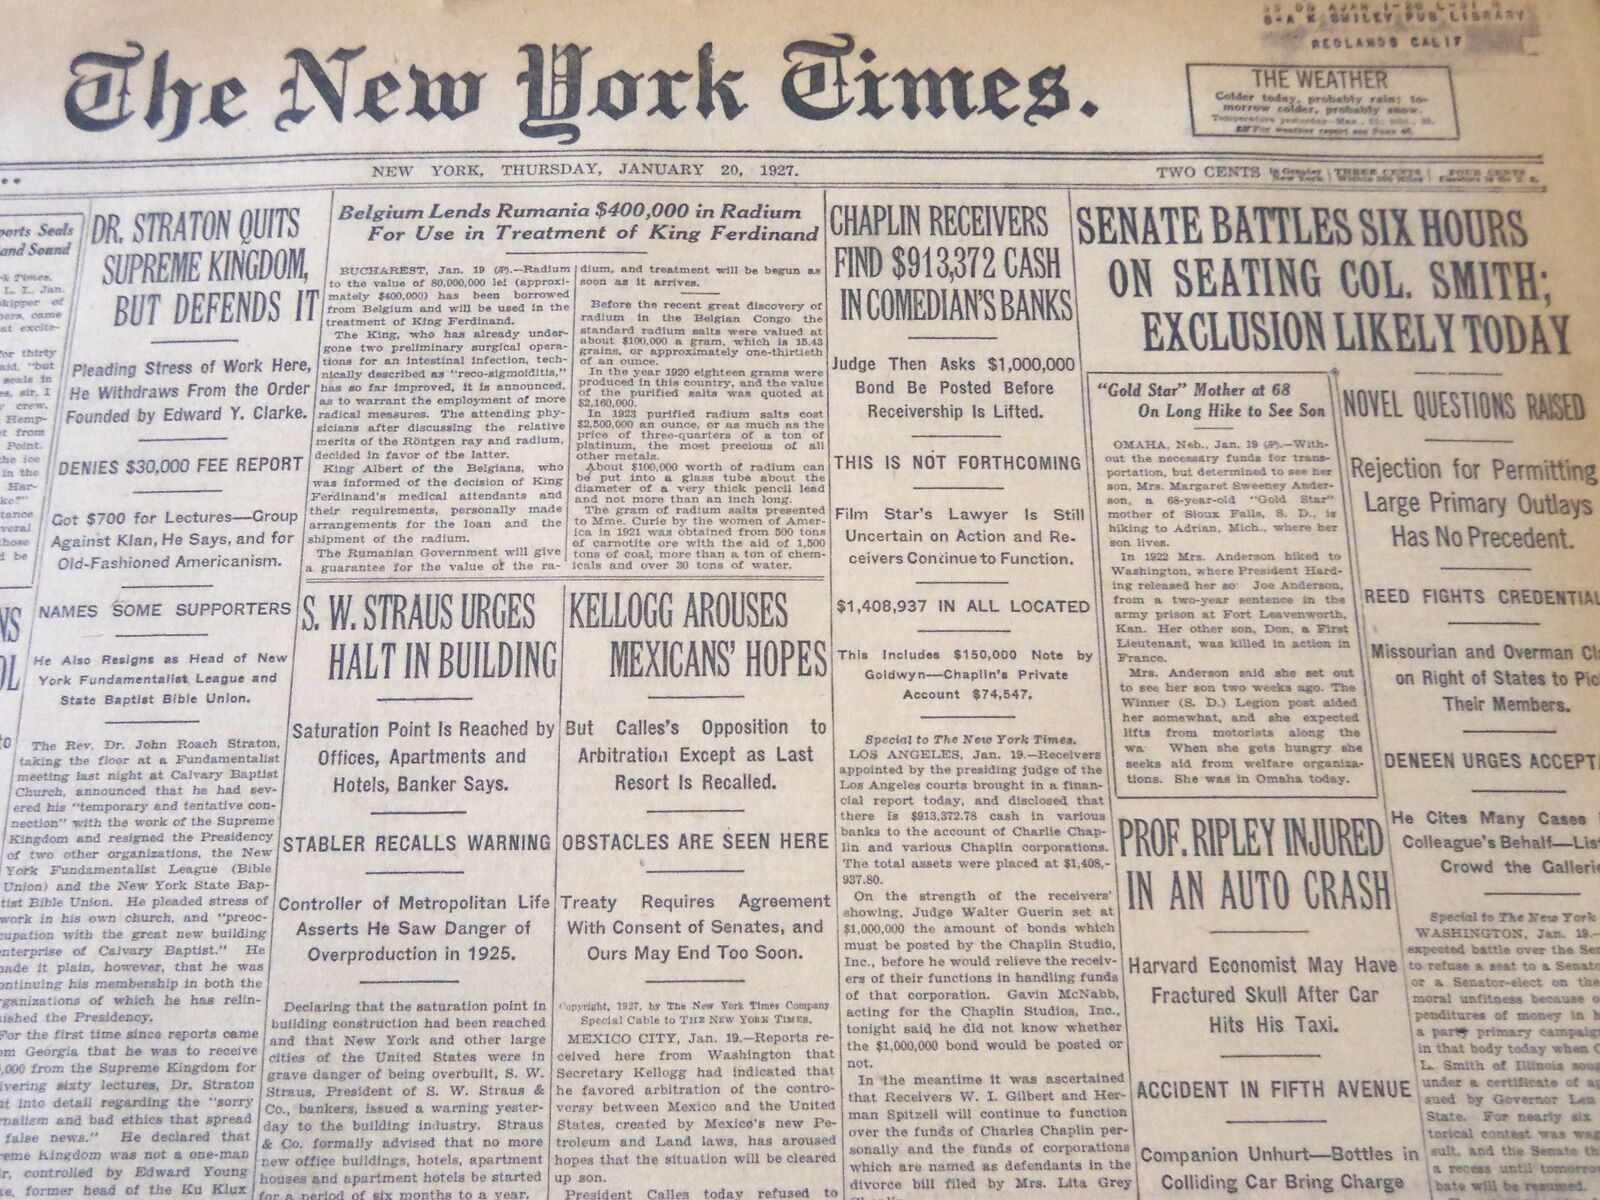 1927 JAN 20 NEW YORK TIMES - CHAPLIN RECEIVERS FIND $913,372 IN BANKS - NT 6369